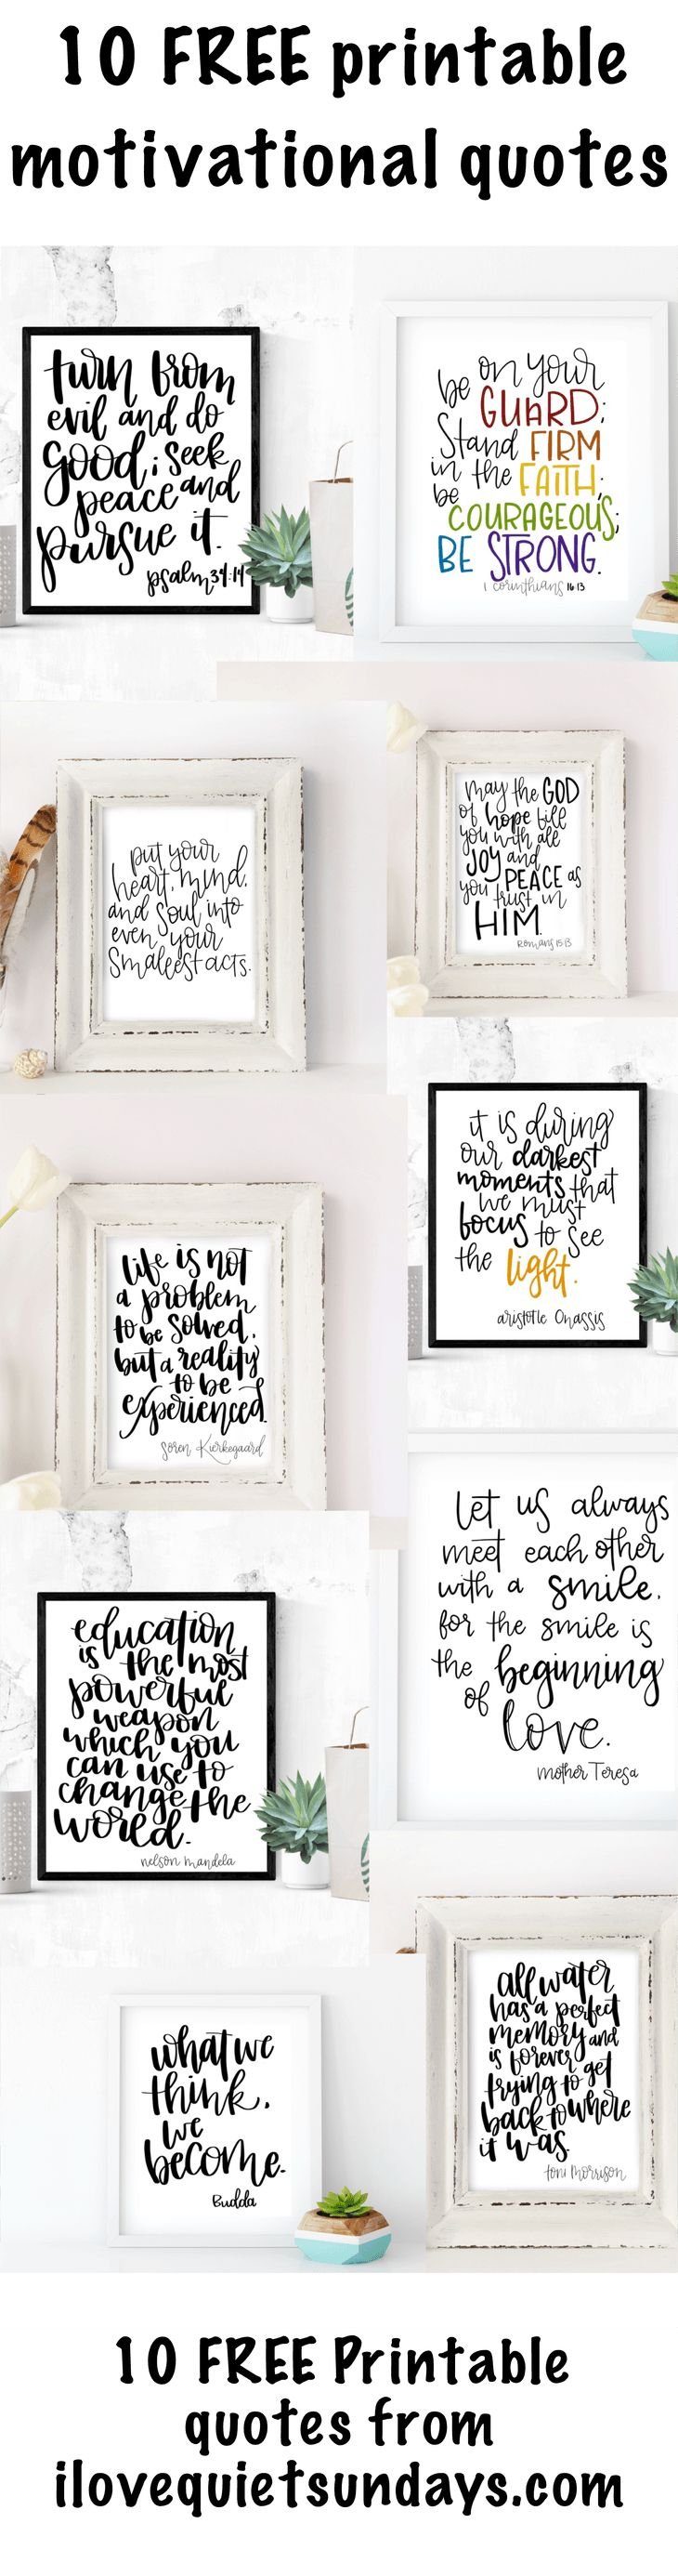 118 Best Word Art Images On Pinterest | Free Printables, Etchings - Free Printable Quotes Templates